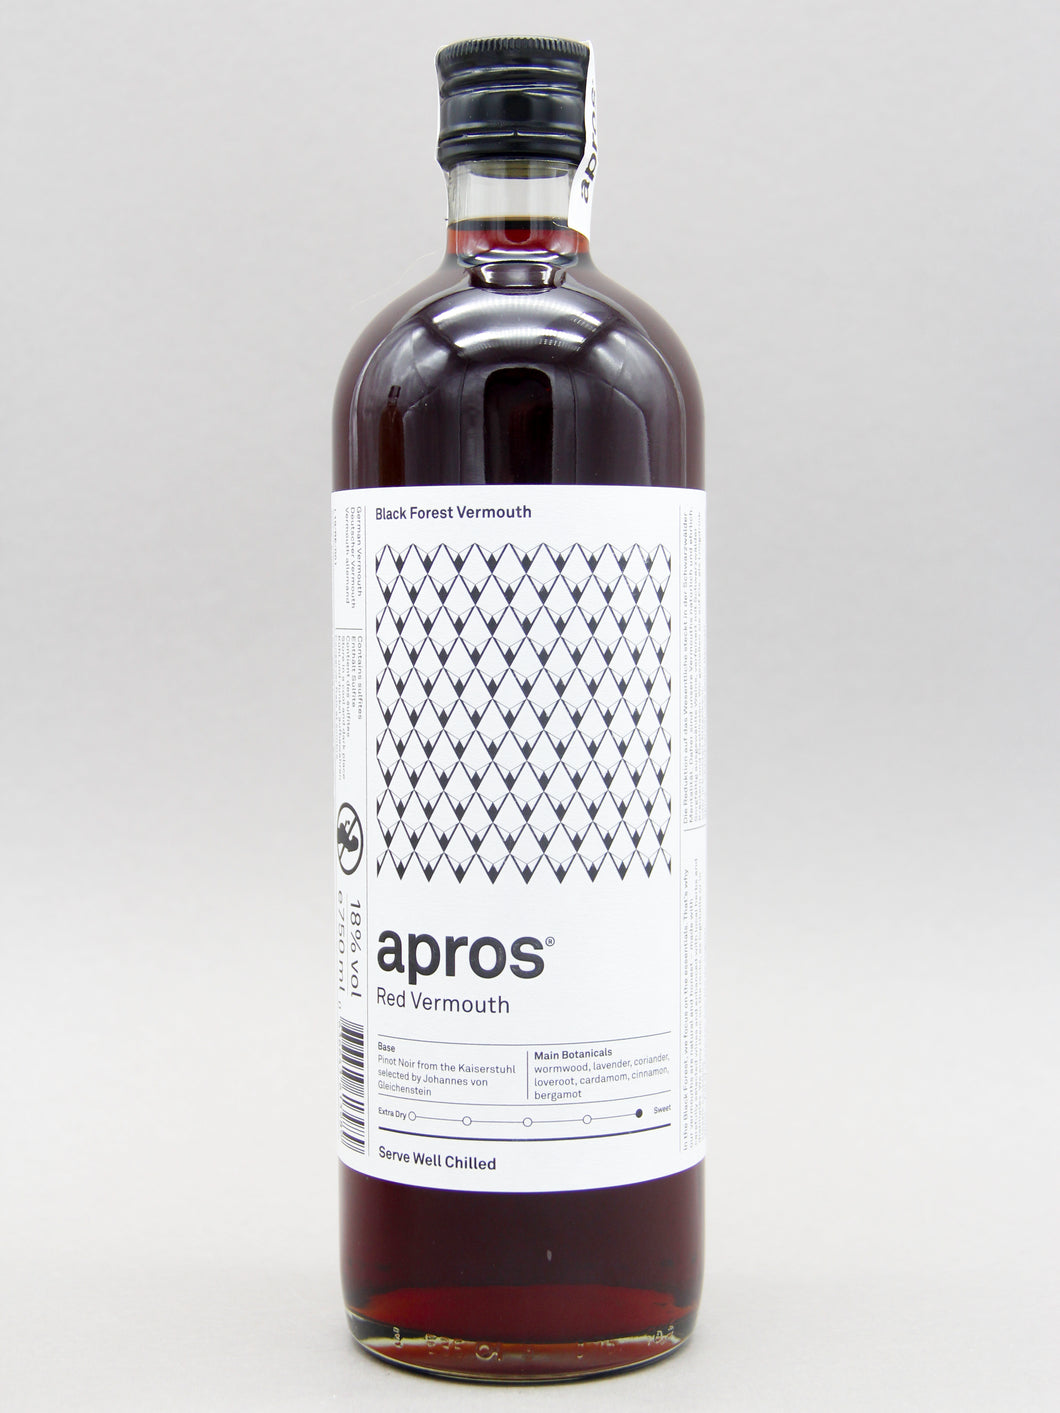 Apros Red, Black Forest Vermouth, Germany (18%, 75cl)